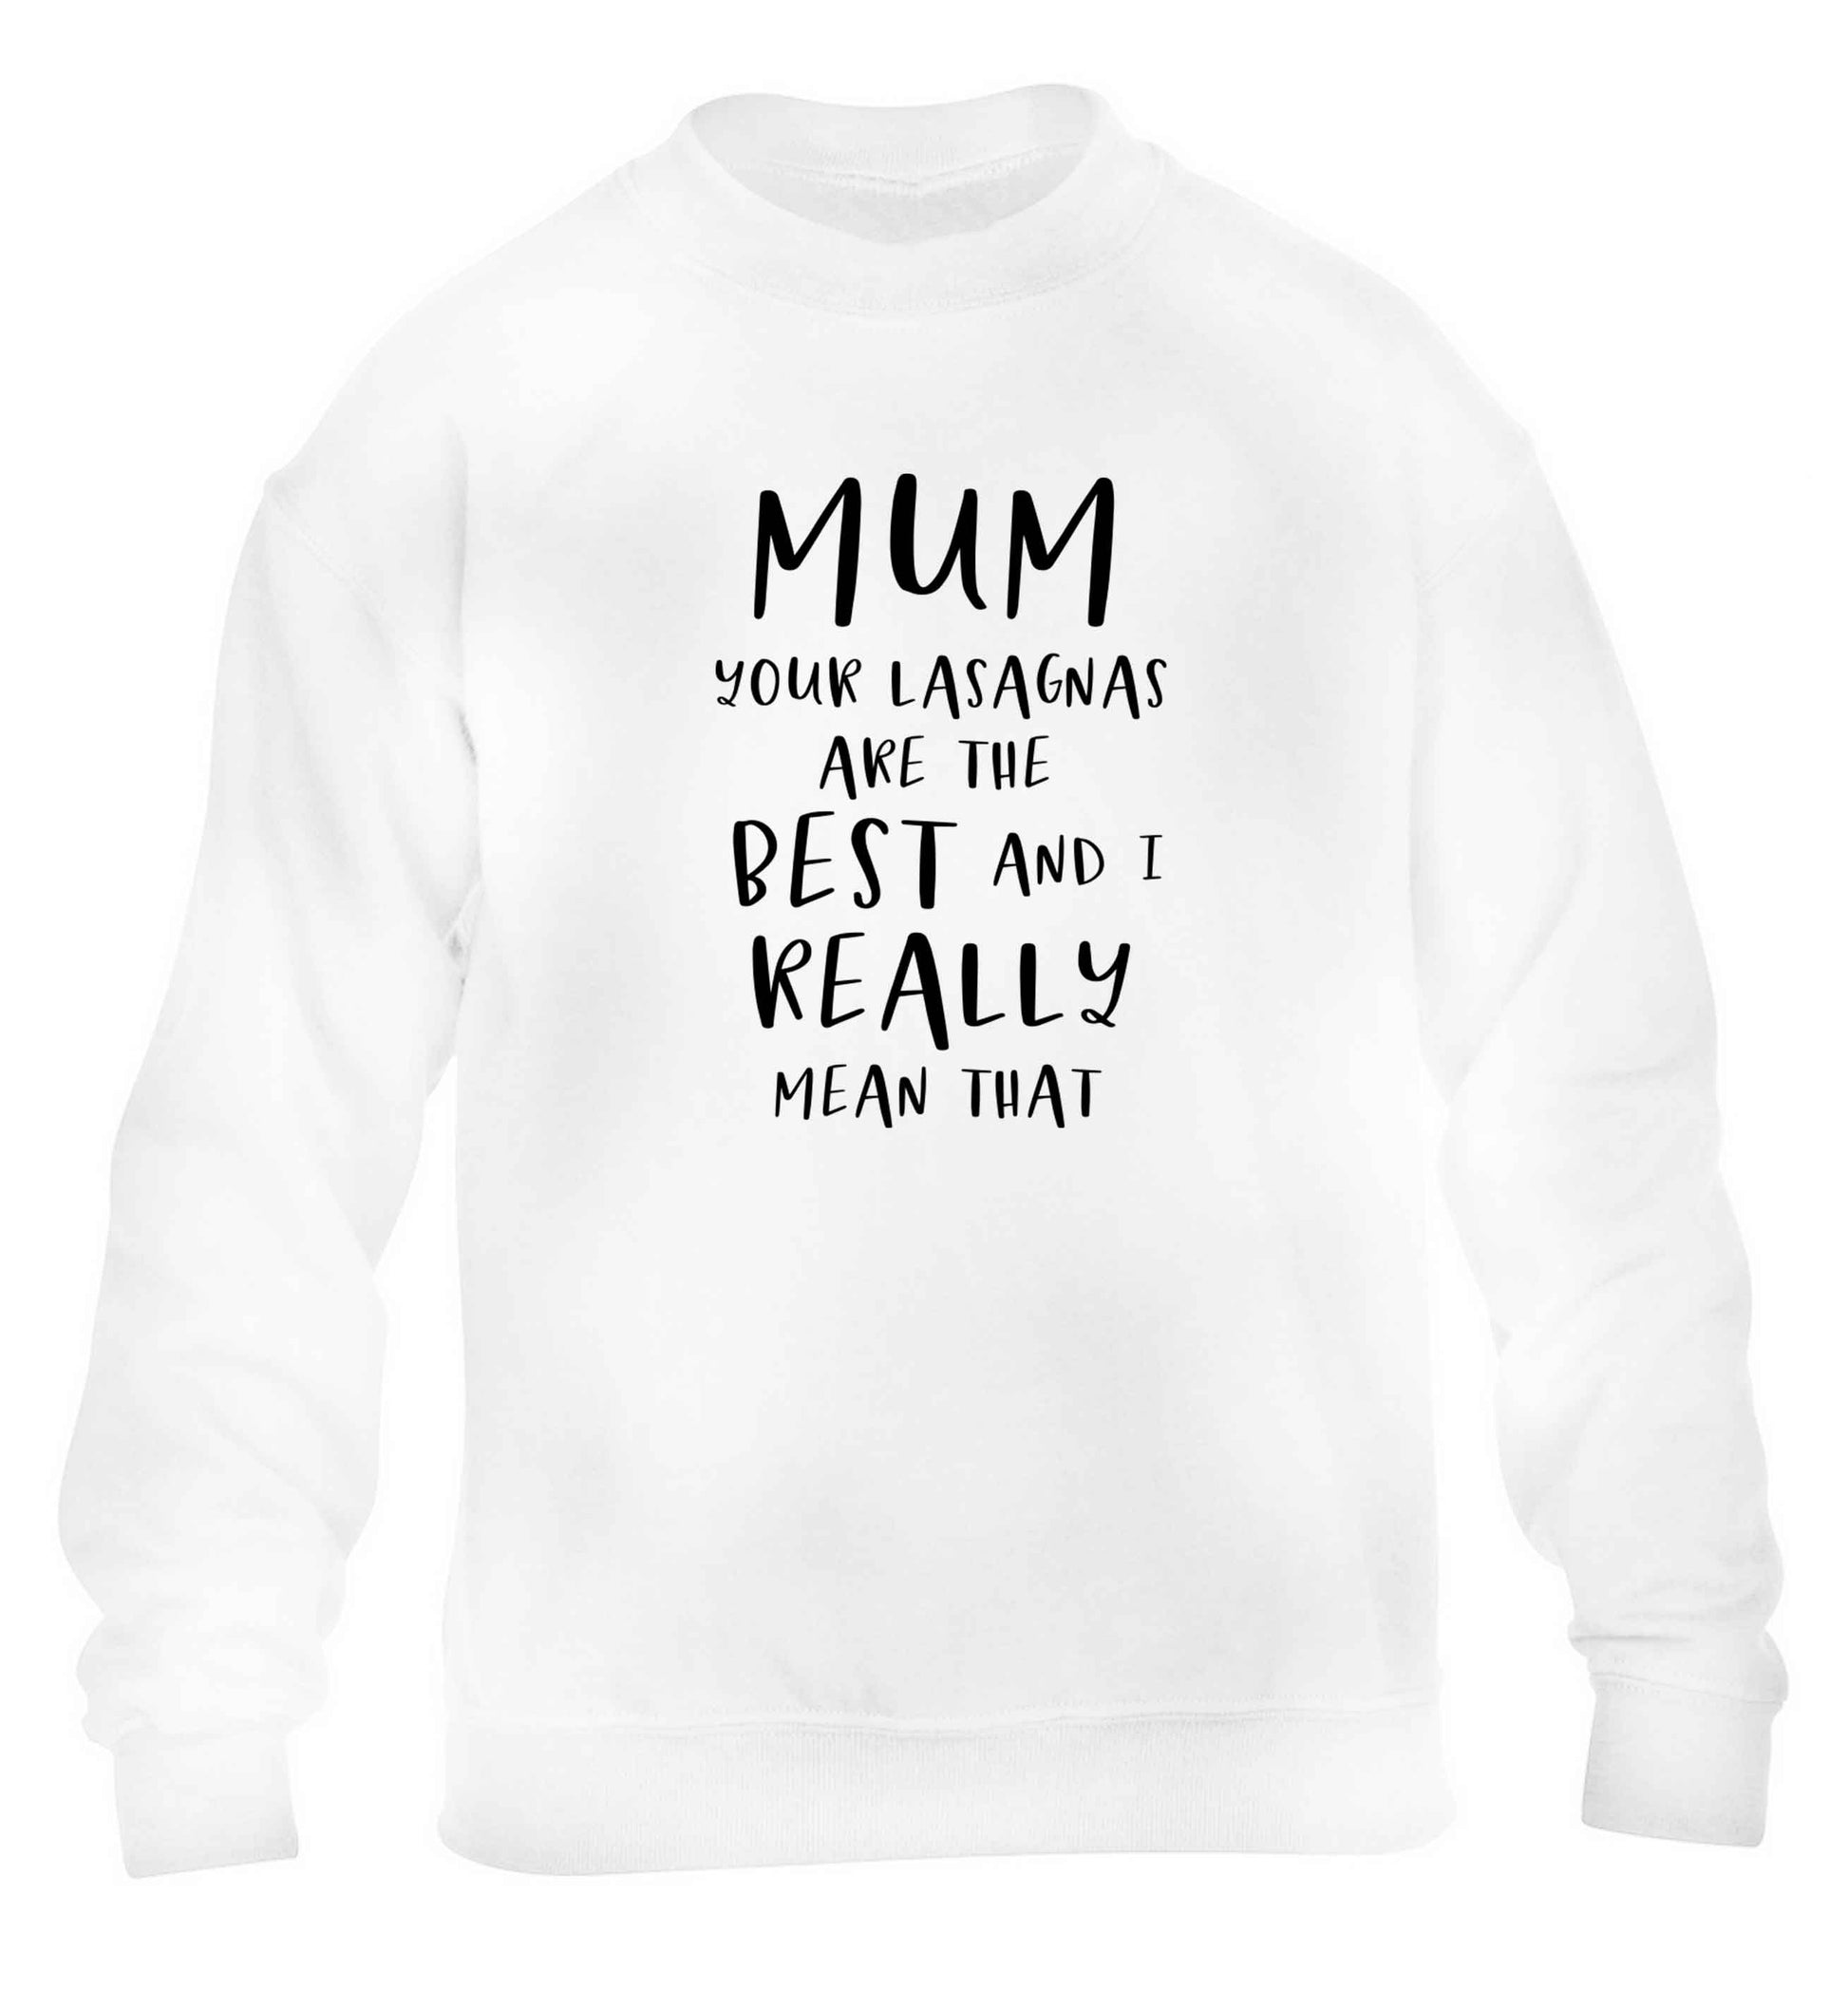 Funny gifts for your mum on mother's dayor her birthday! Mum your lasagnas are the best and I really mean that children's white sweater 12-13 Years